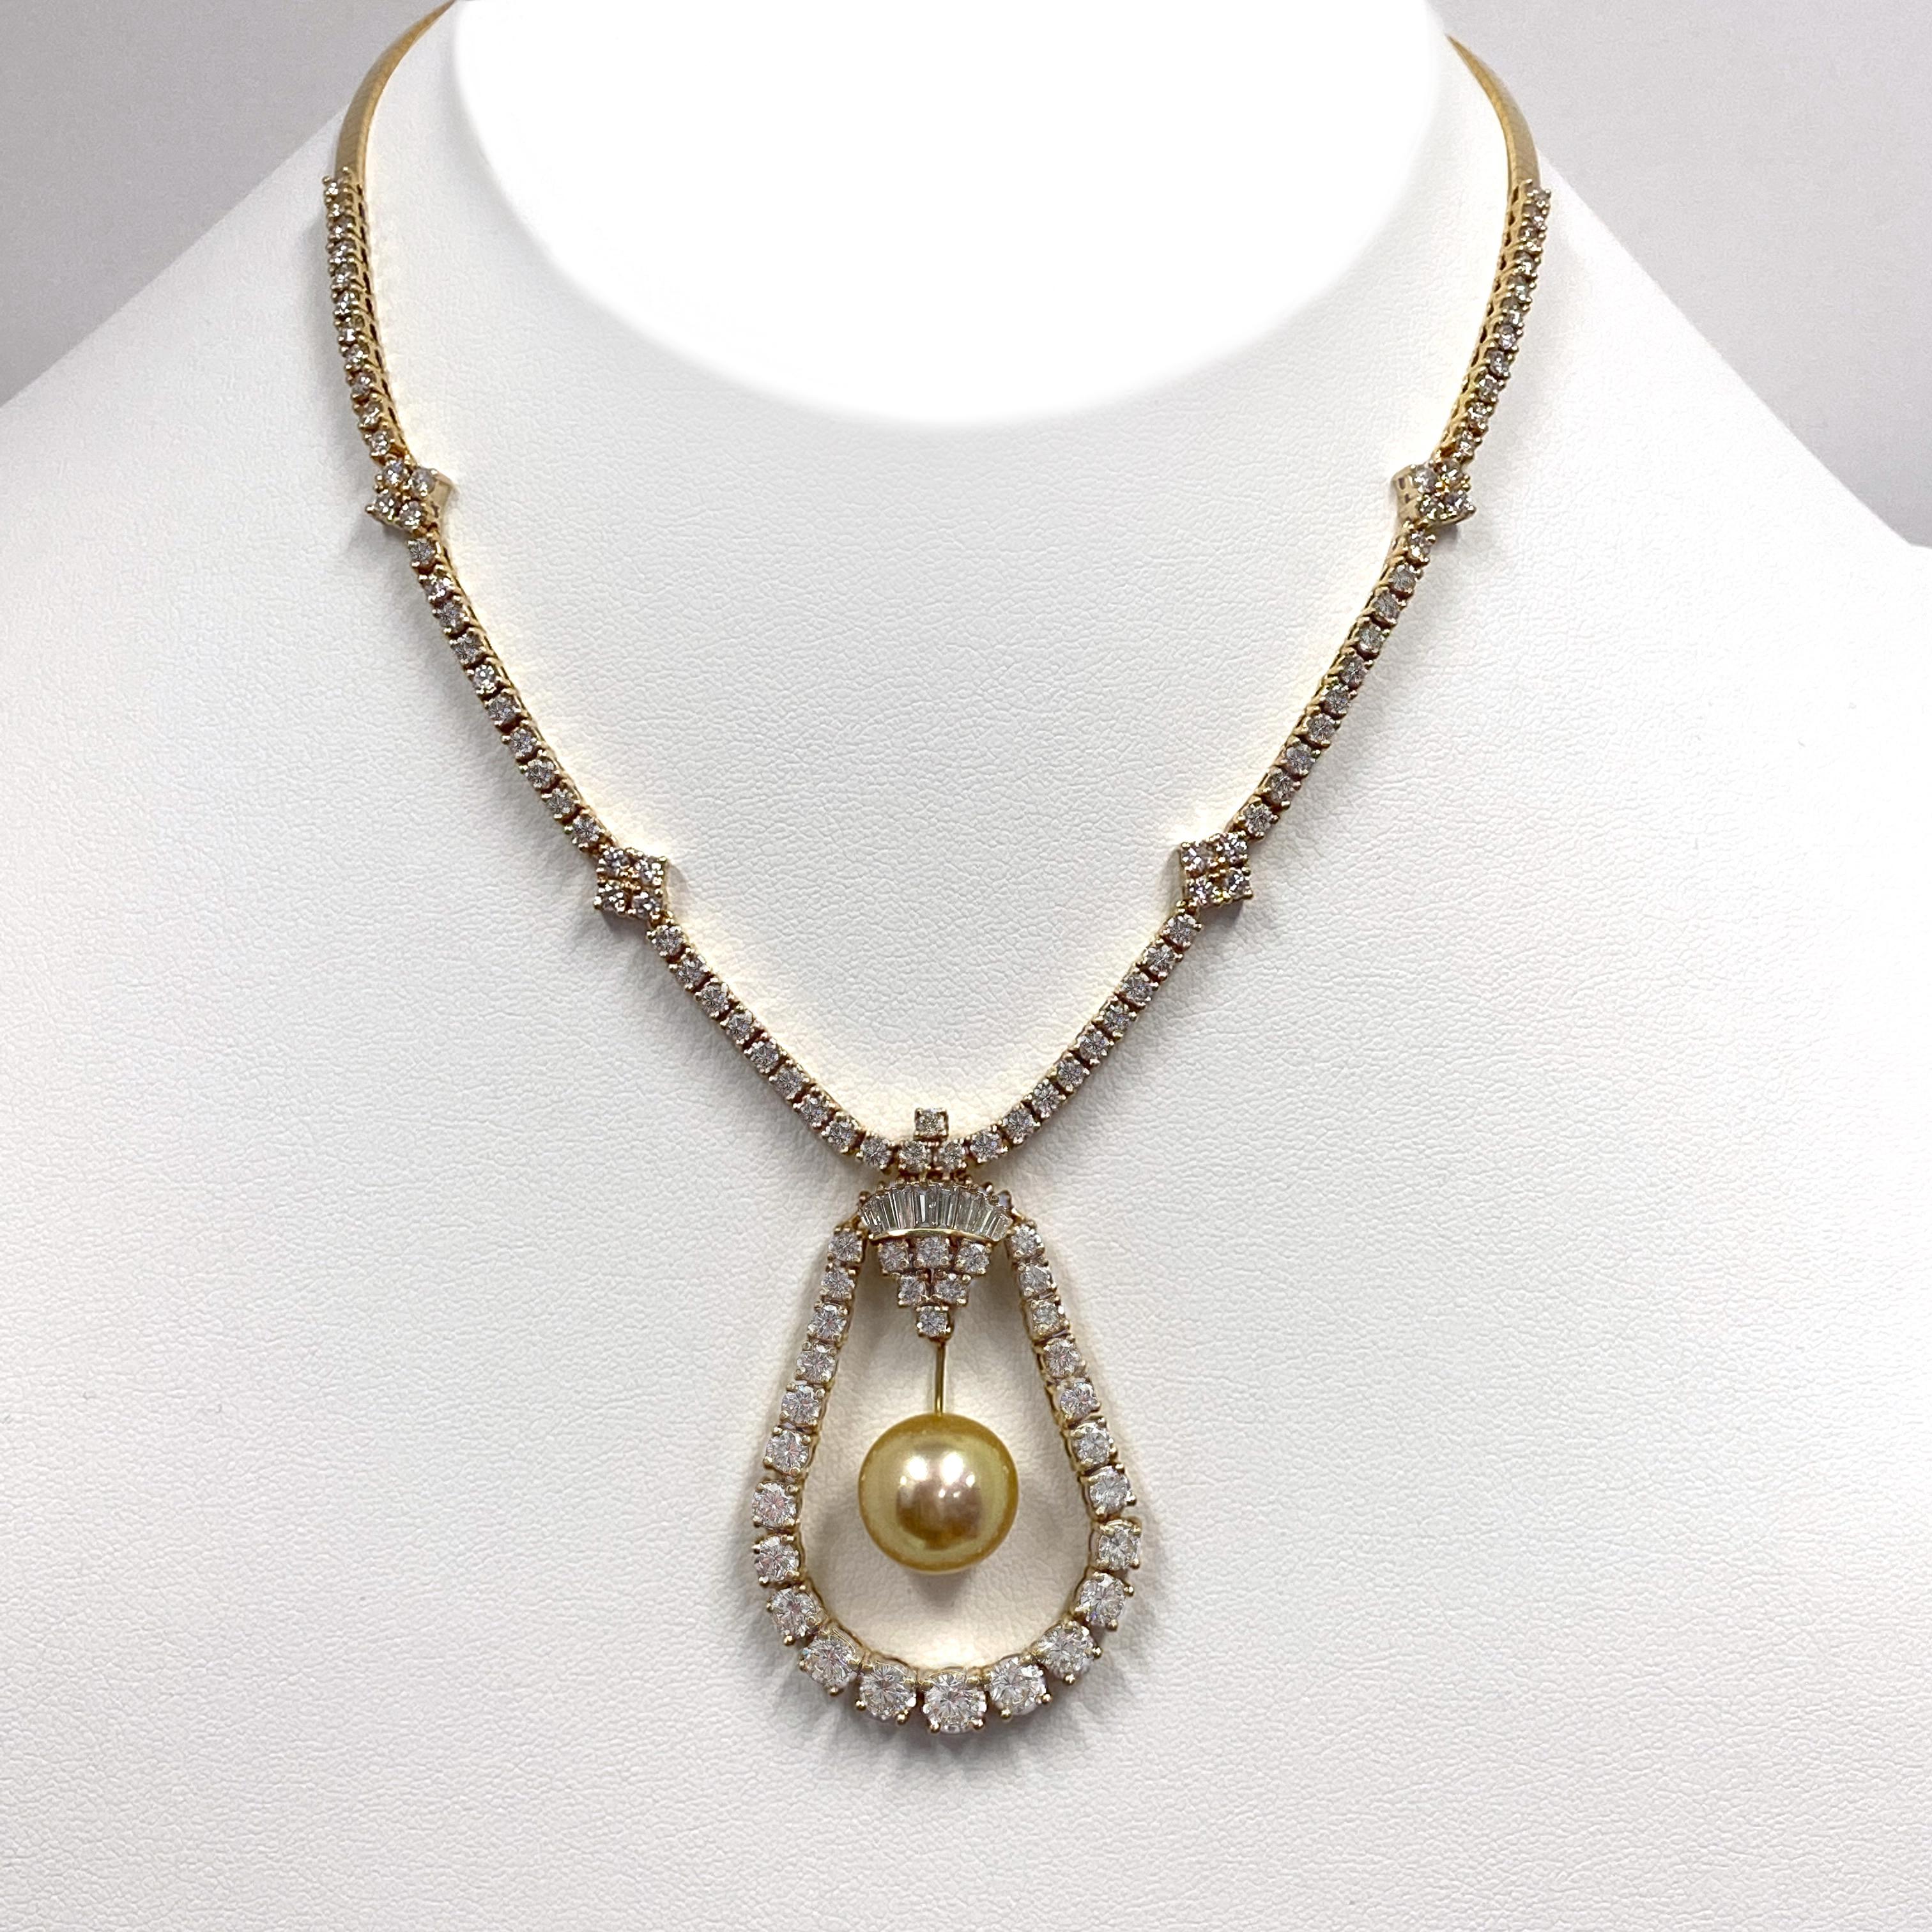 Brilliant Cut 11 Carat Diamond Line Omega Necklace in Yellow Gold with Golden South Sea Pearl For Sale